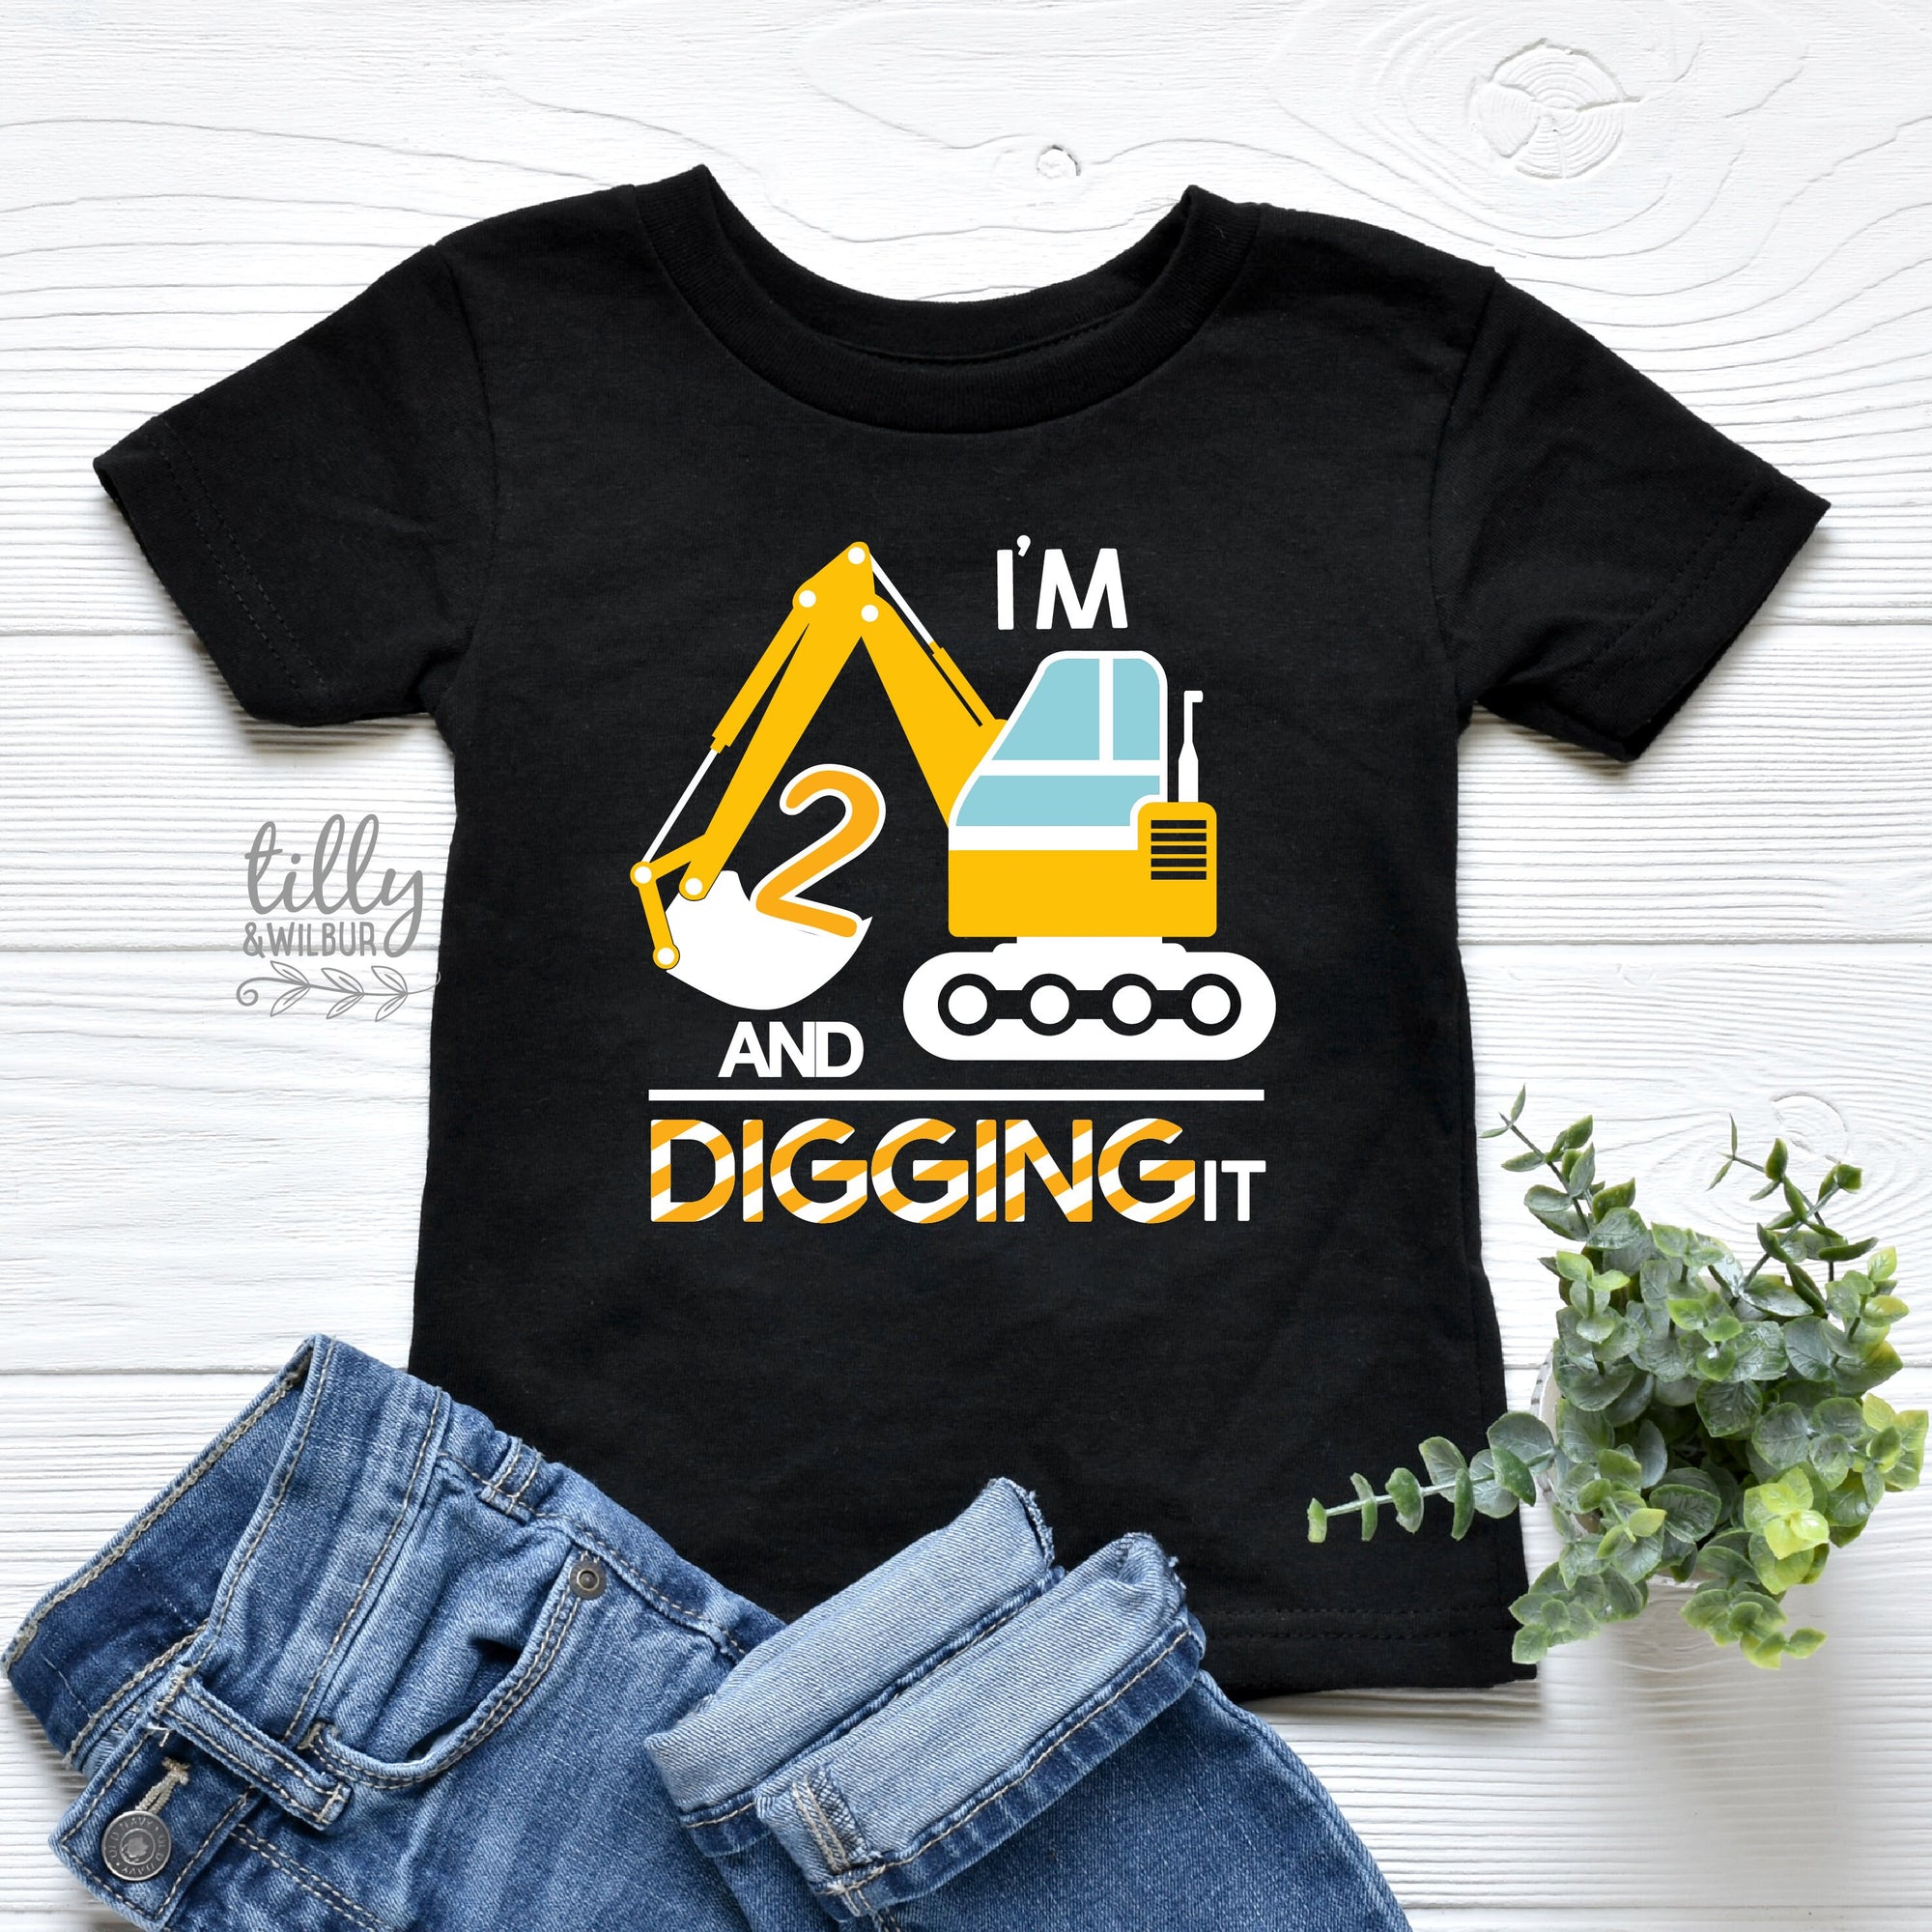 I'm Two And Digging It T-Shirt, I Dig Being Two Birthday T-Shirt, 2nd Birthday T-Shirt, 2nd Second Birthday Tee, Two Birthday Gift, Boy 2